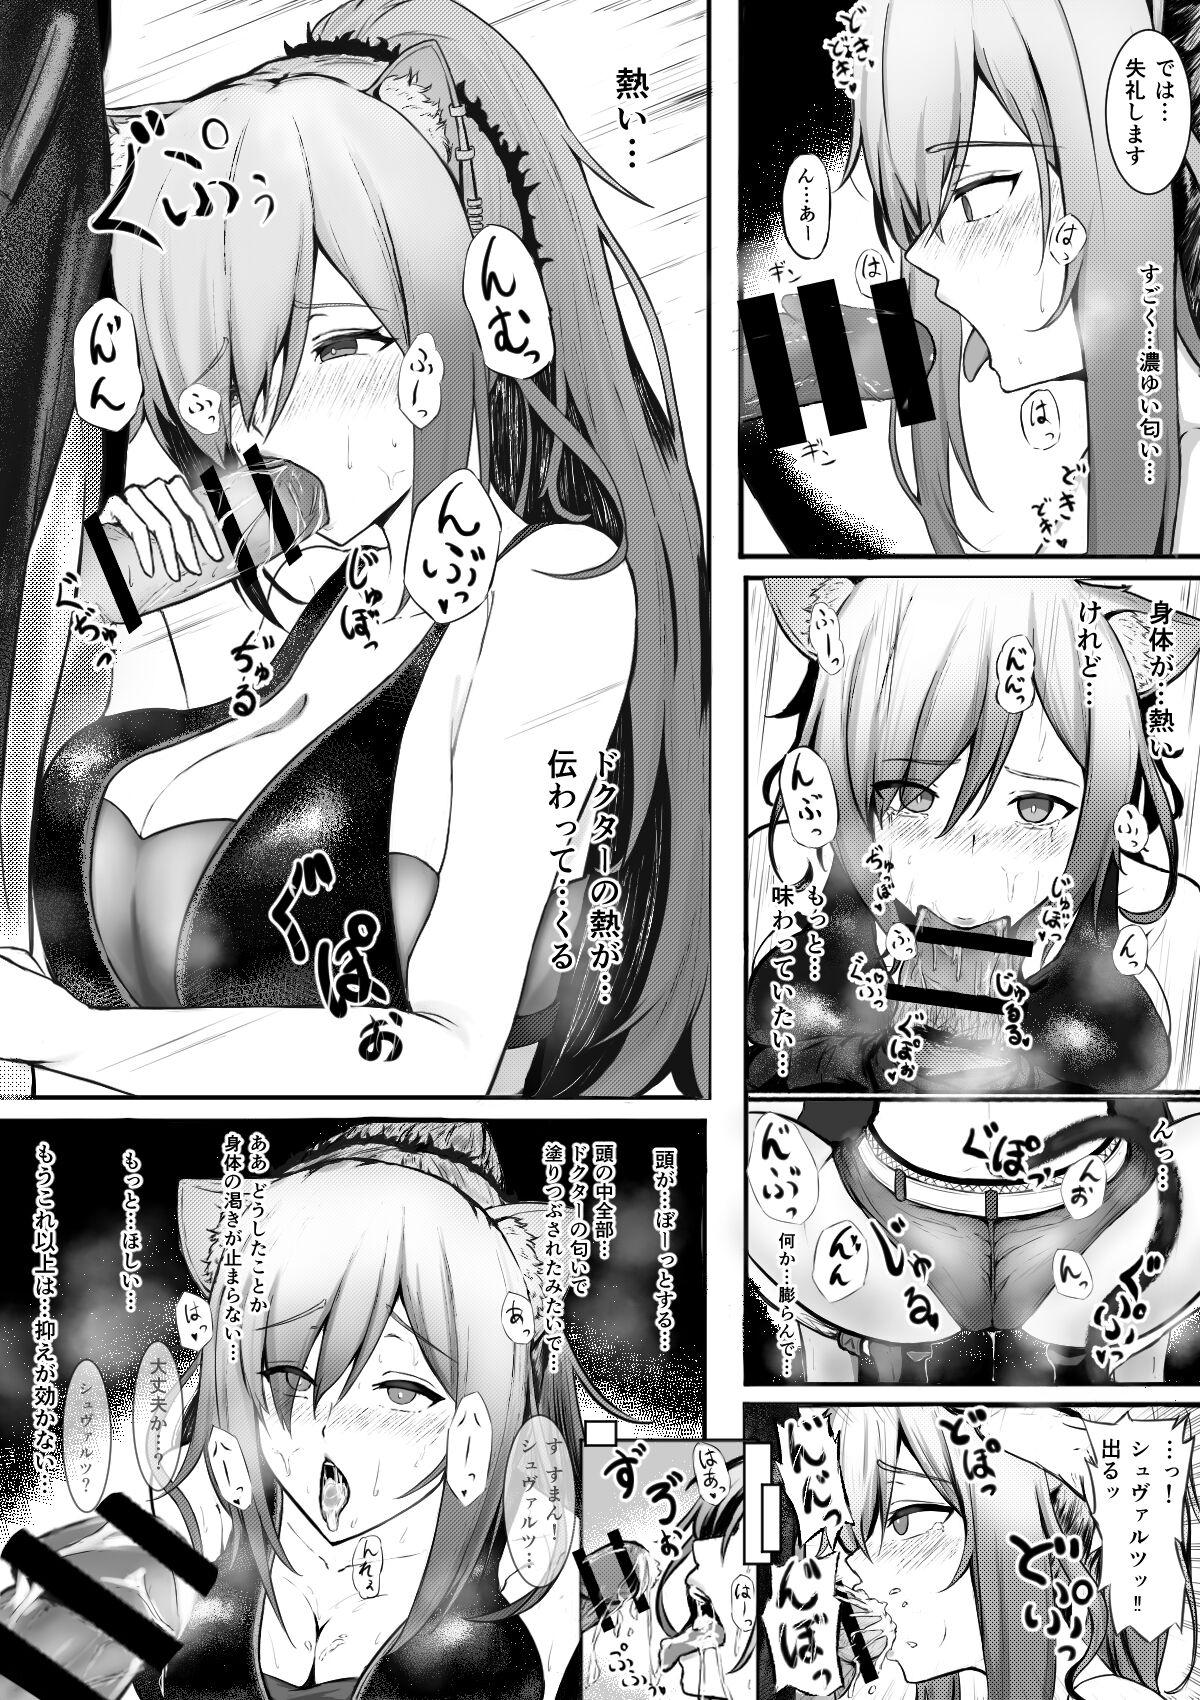 Tiny Titties arknights short story - Arknights Ass Fucking - Picture 3